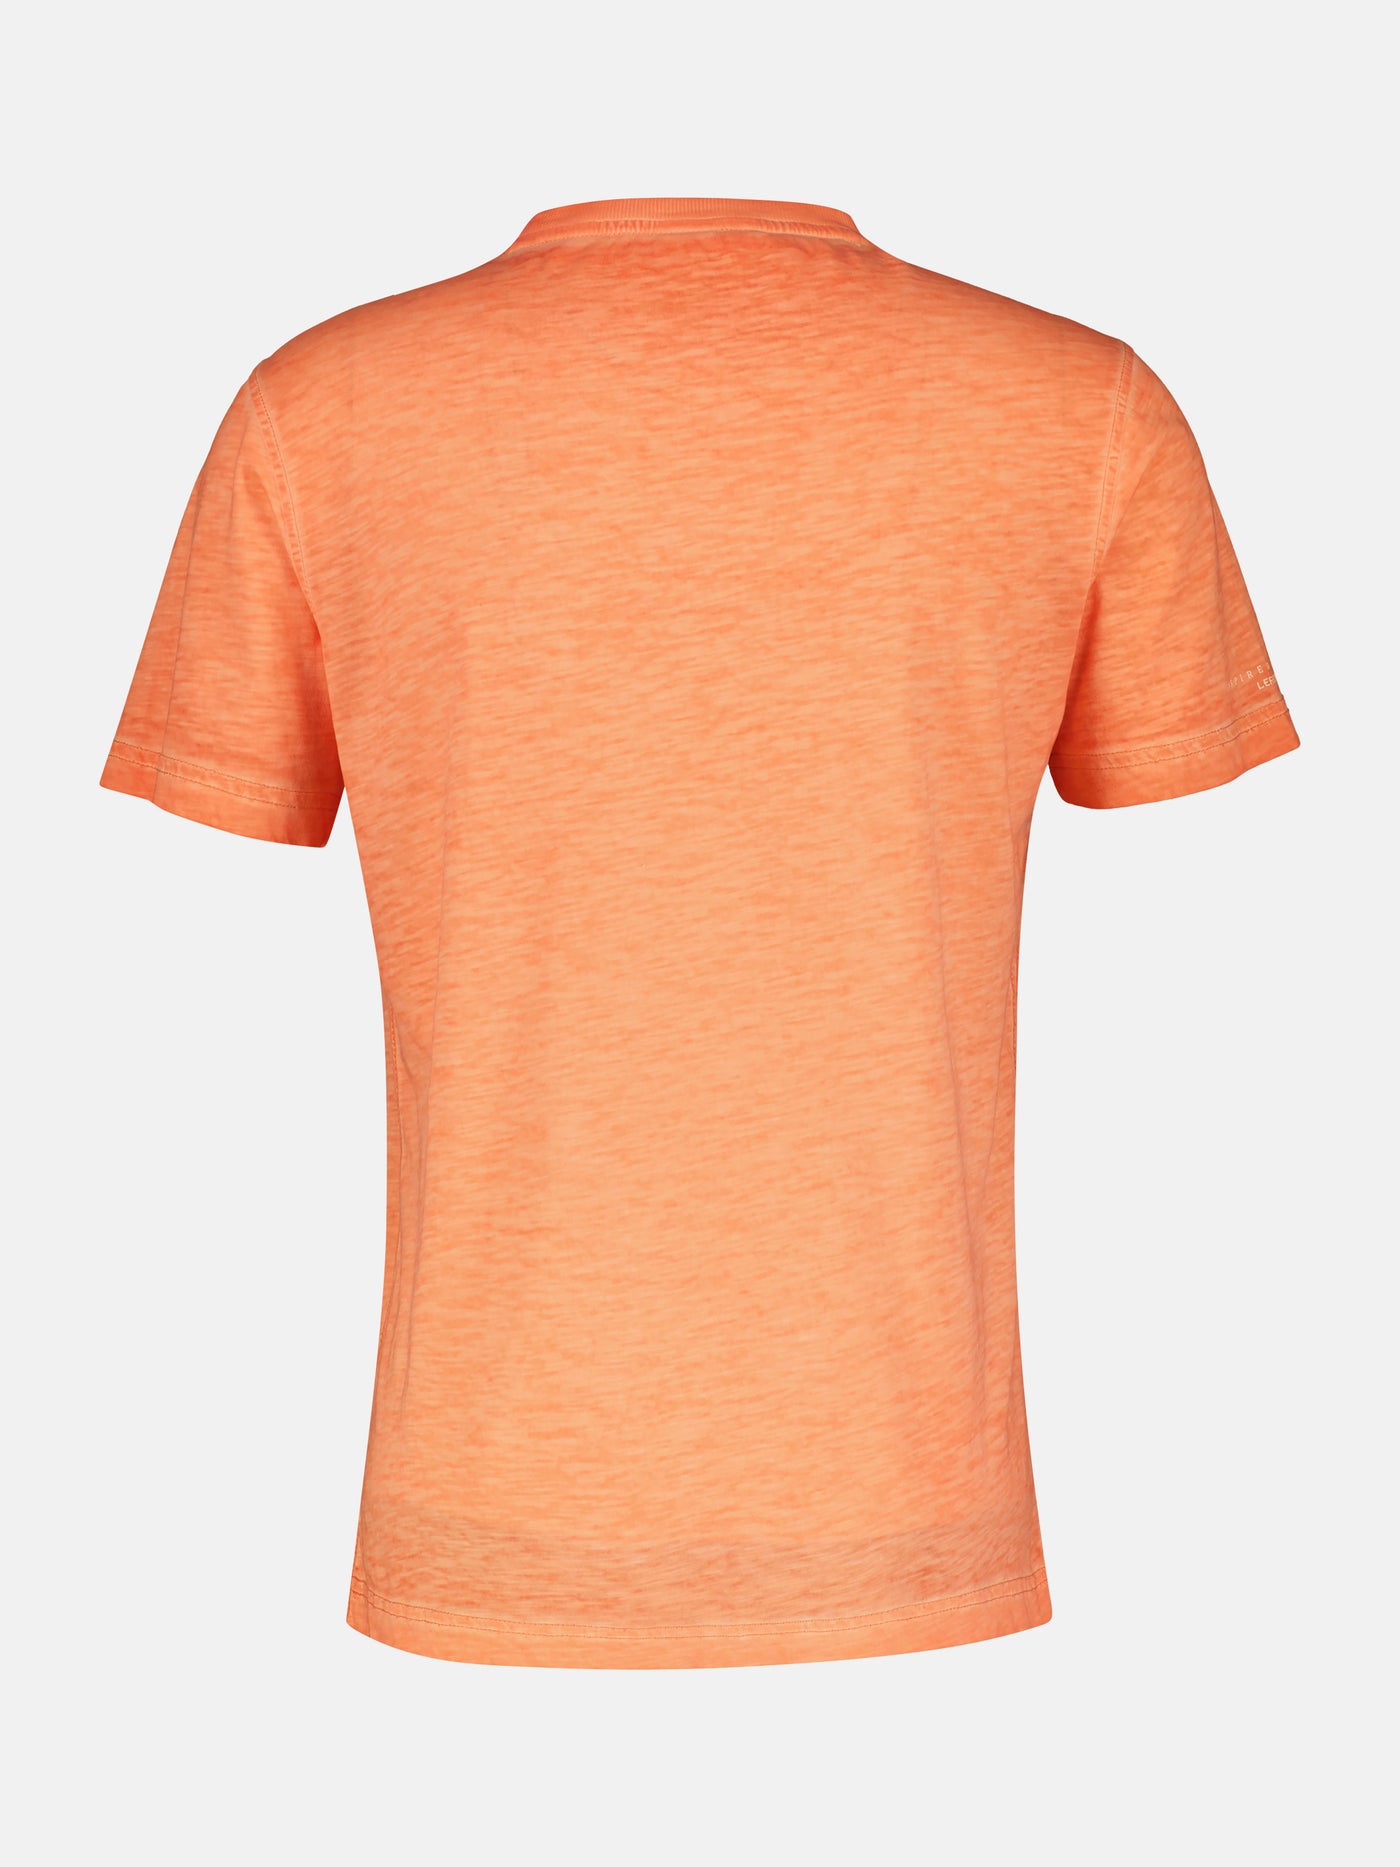 Men's T-shirt with all-over print